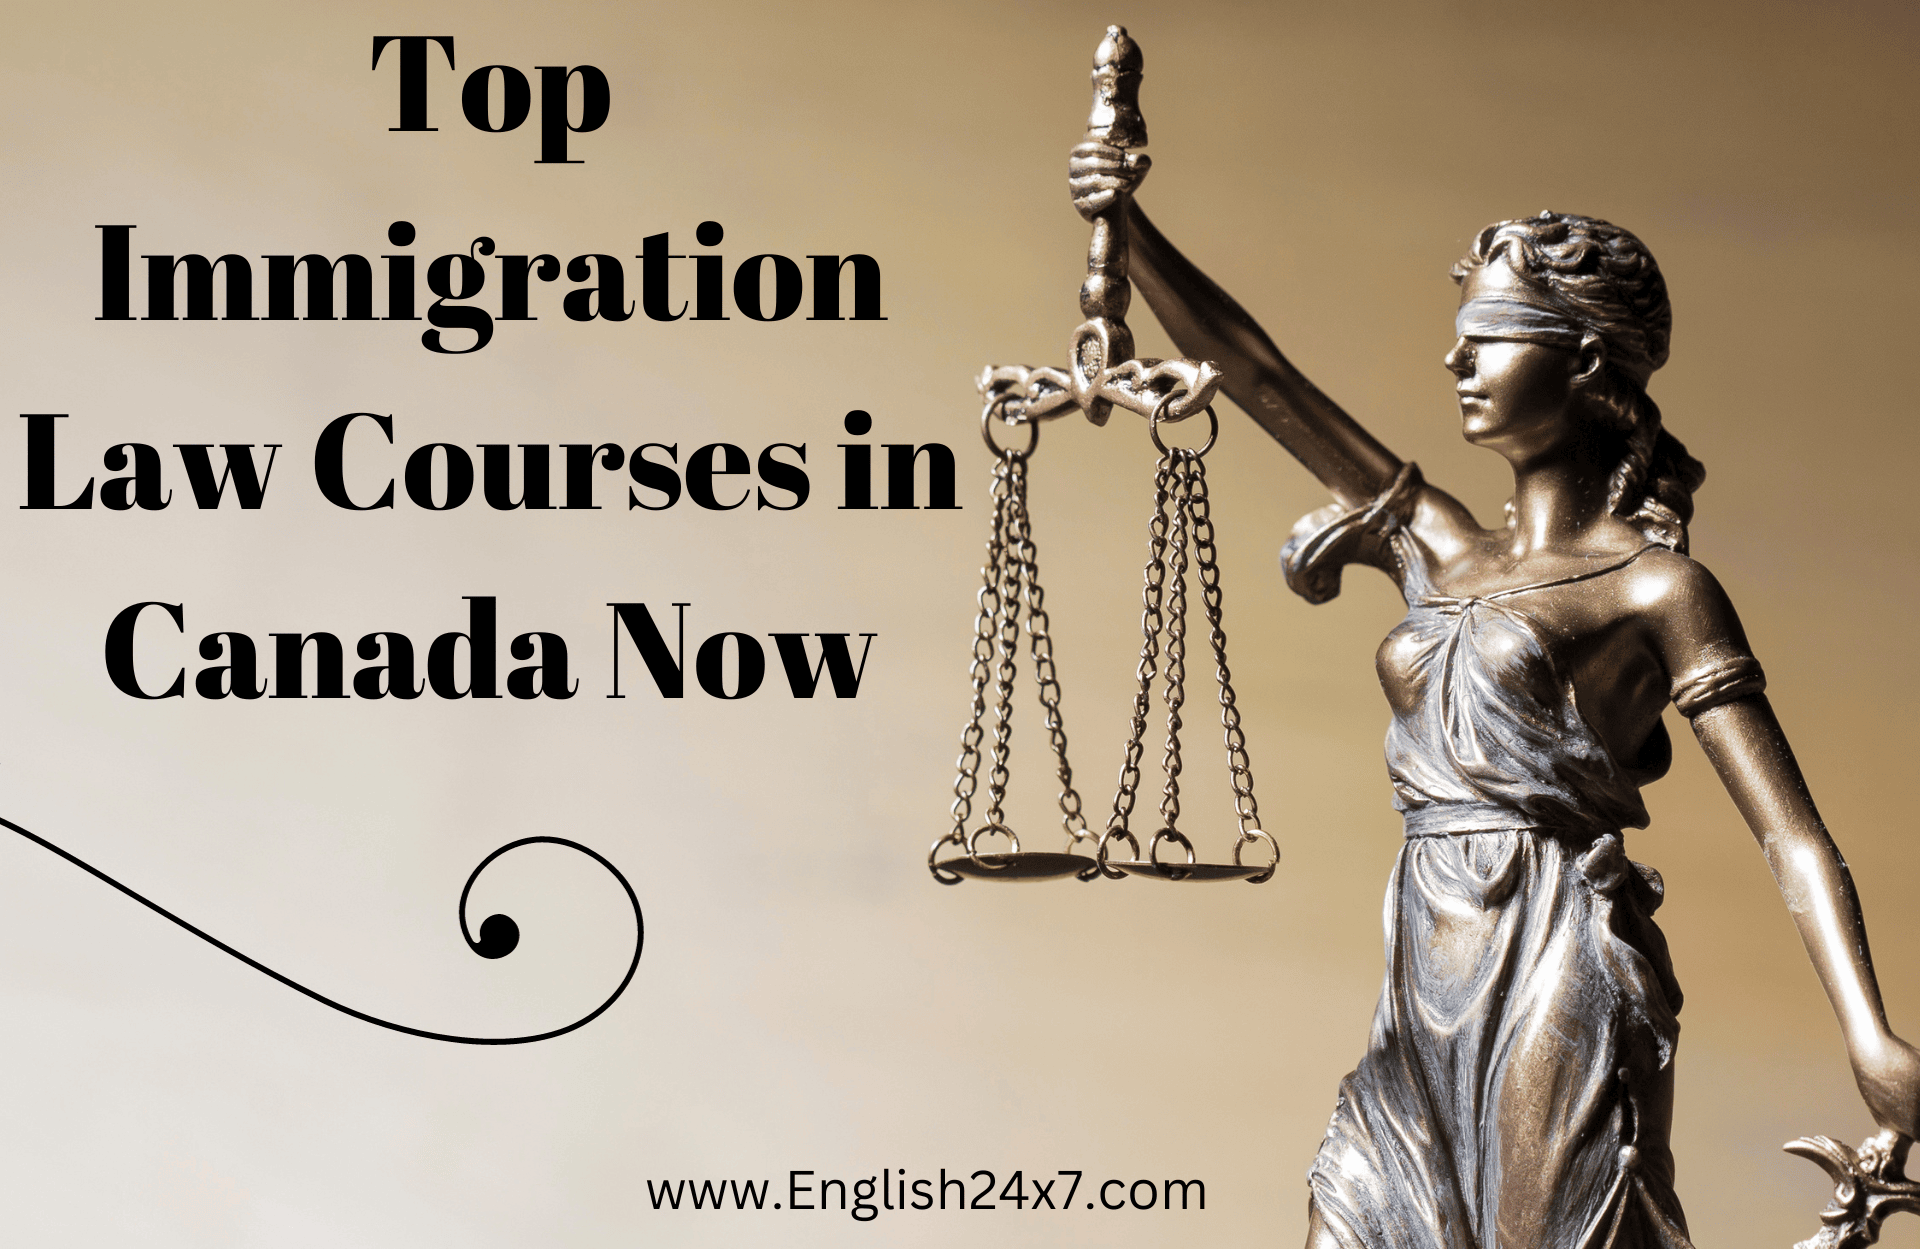 Top Immigration Law Courses in Canada Now